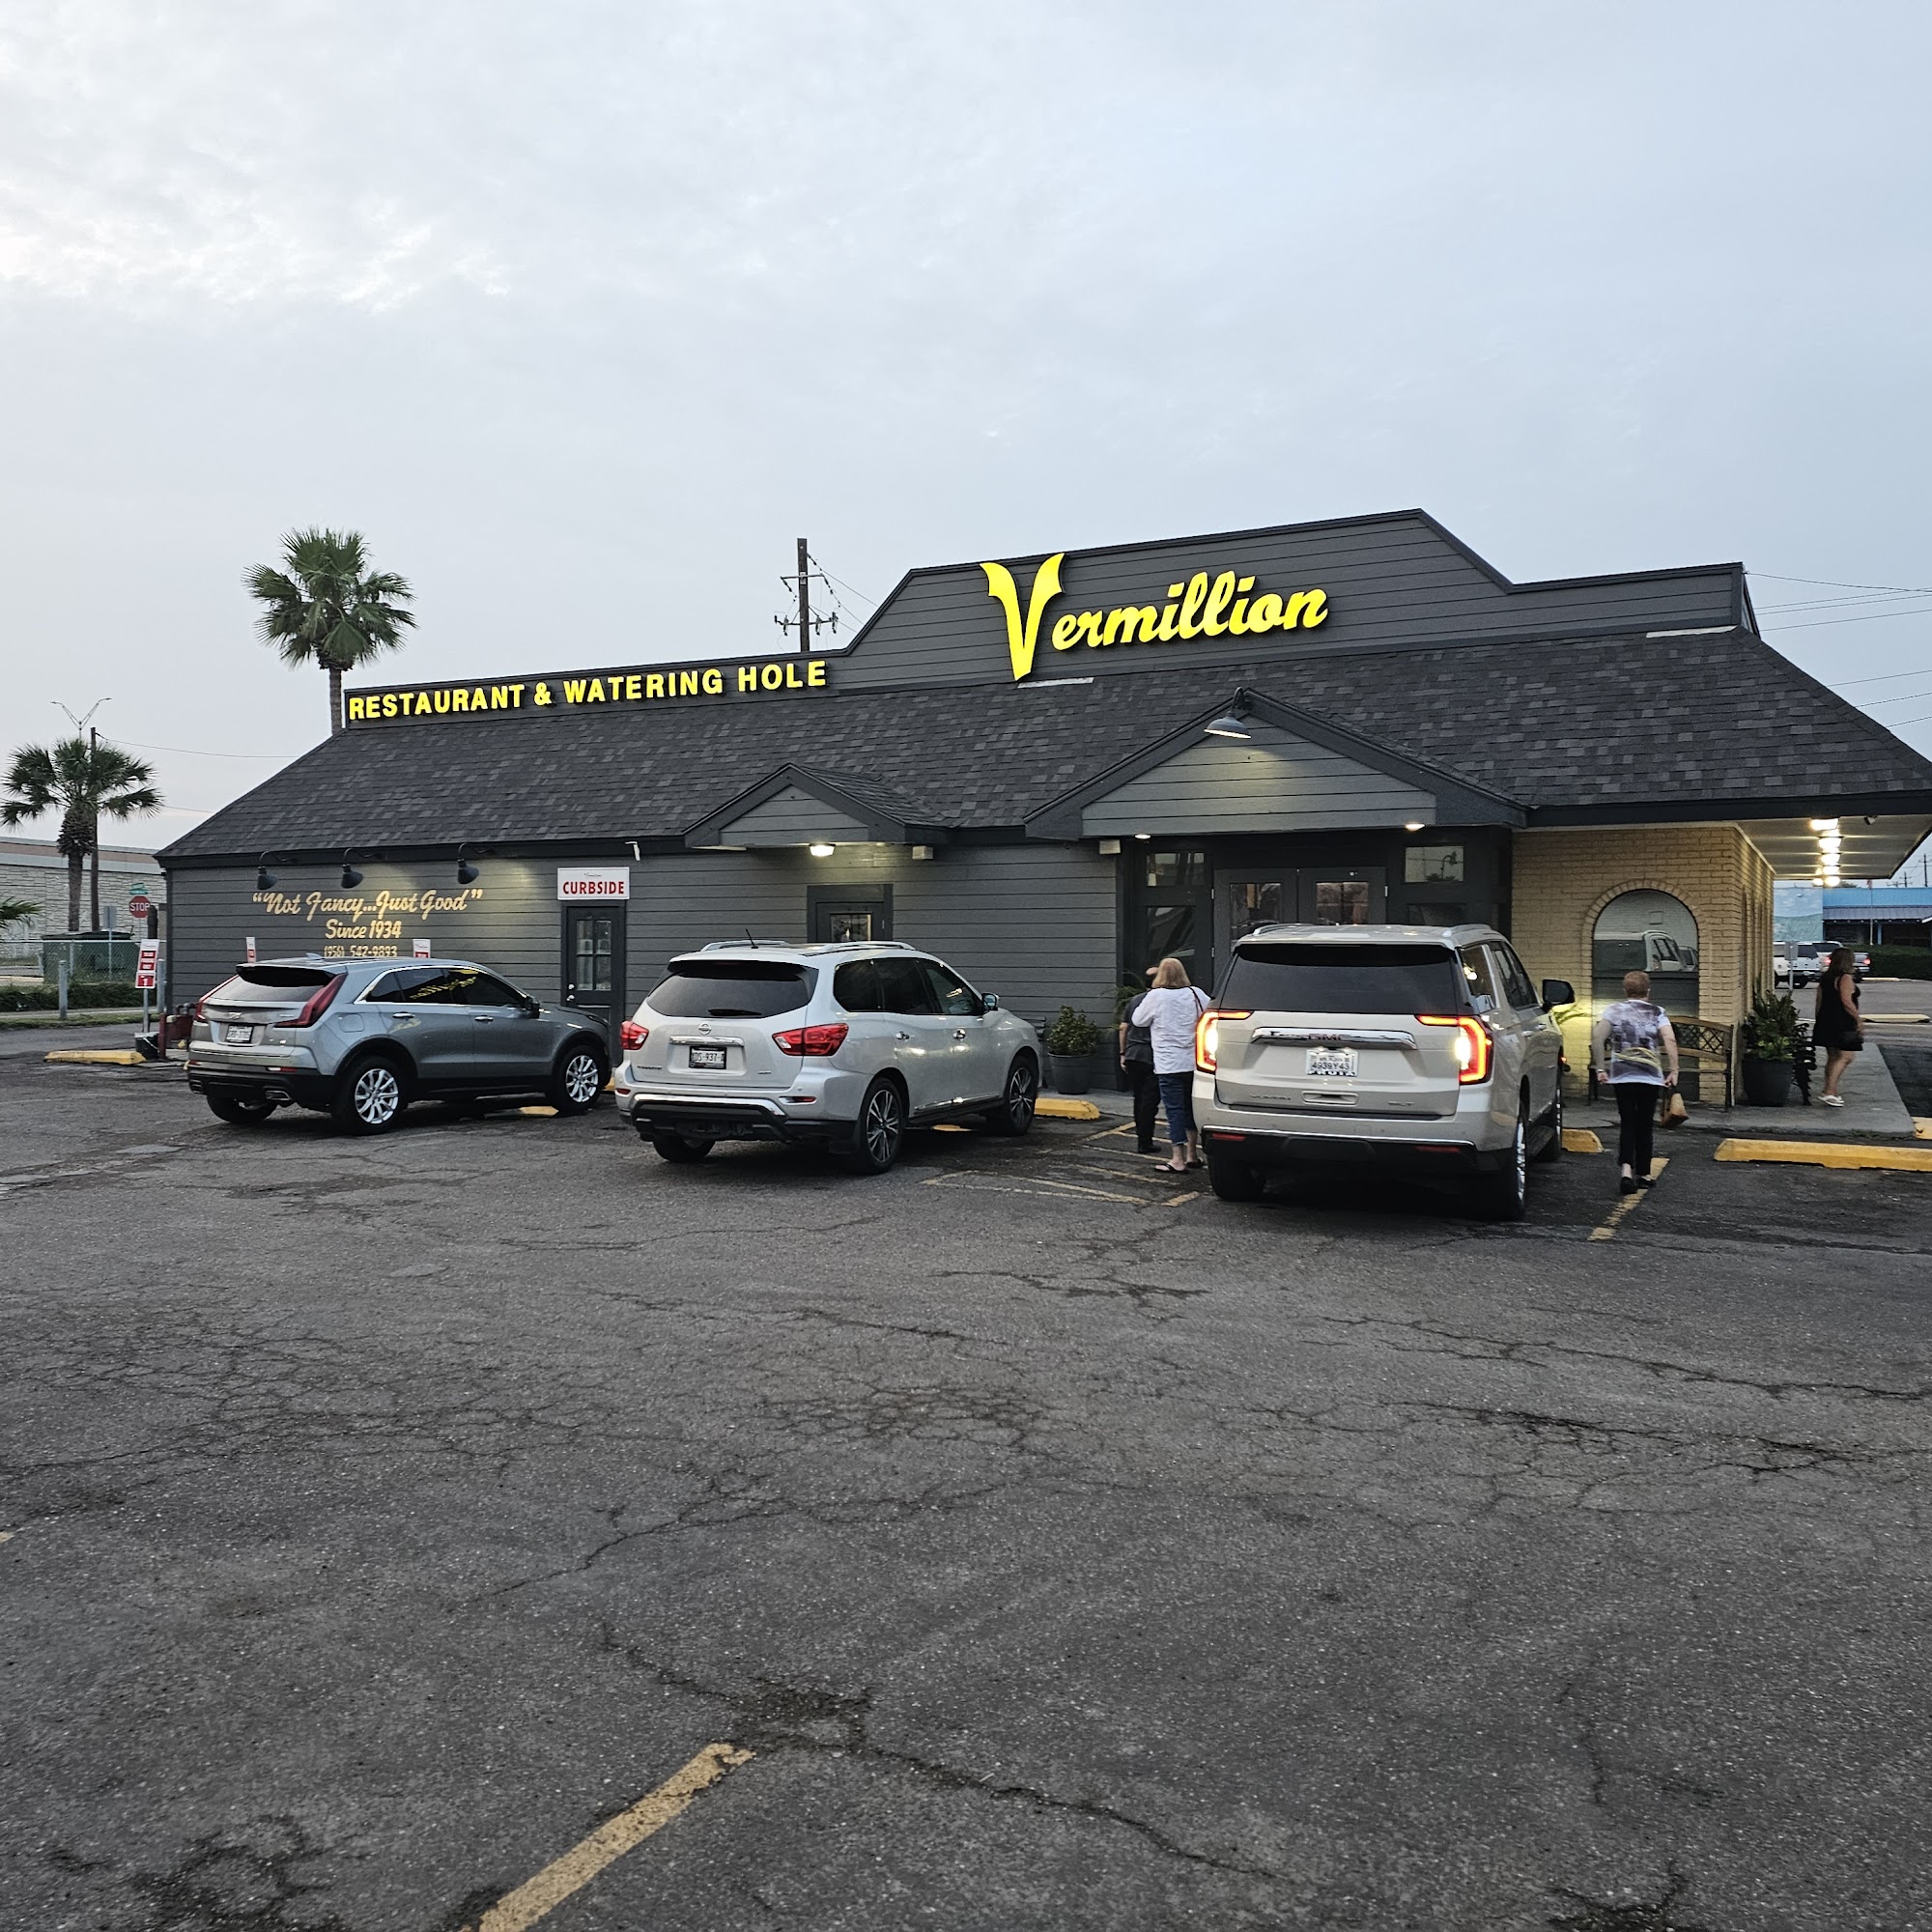 Vermillion Restaurant and Watering Hole